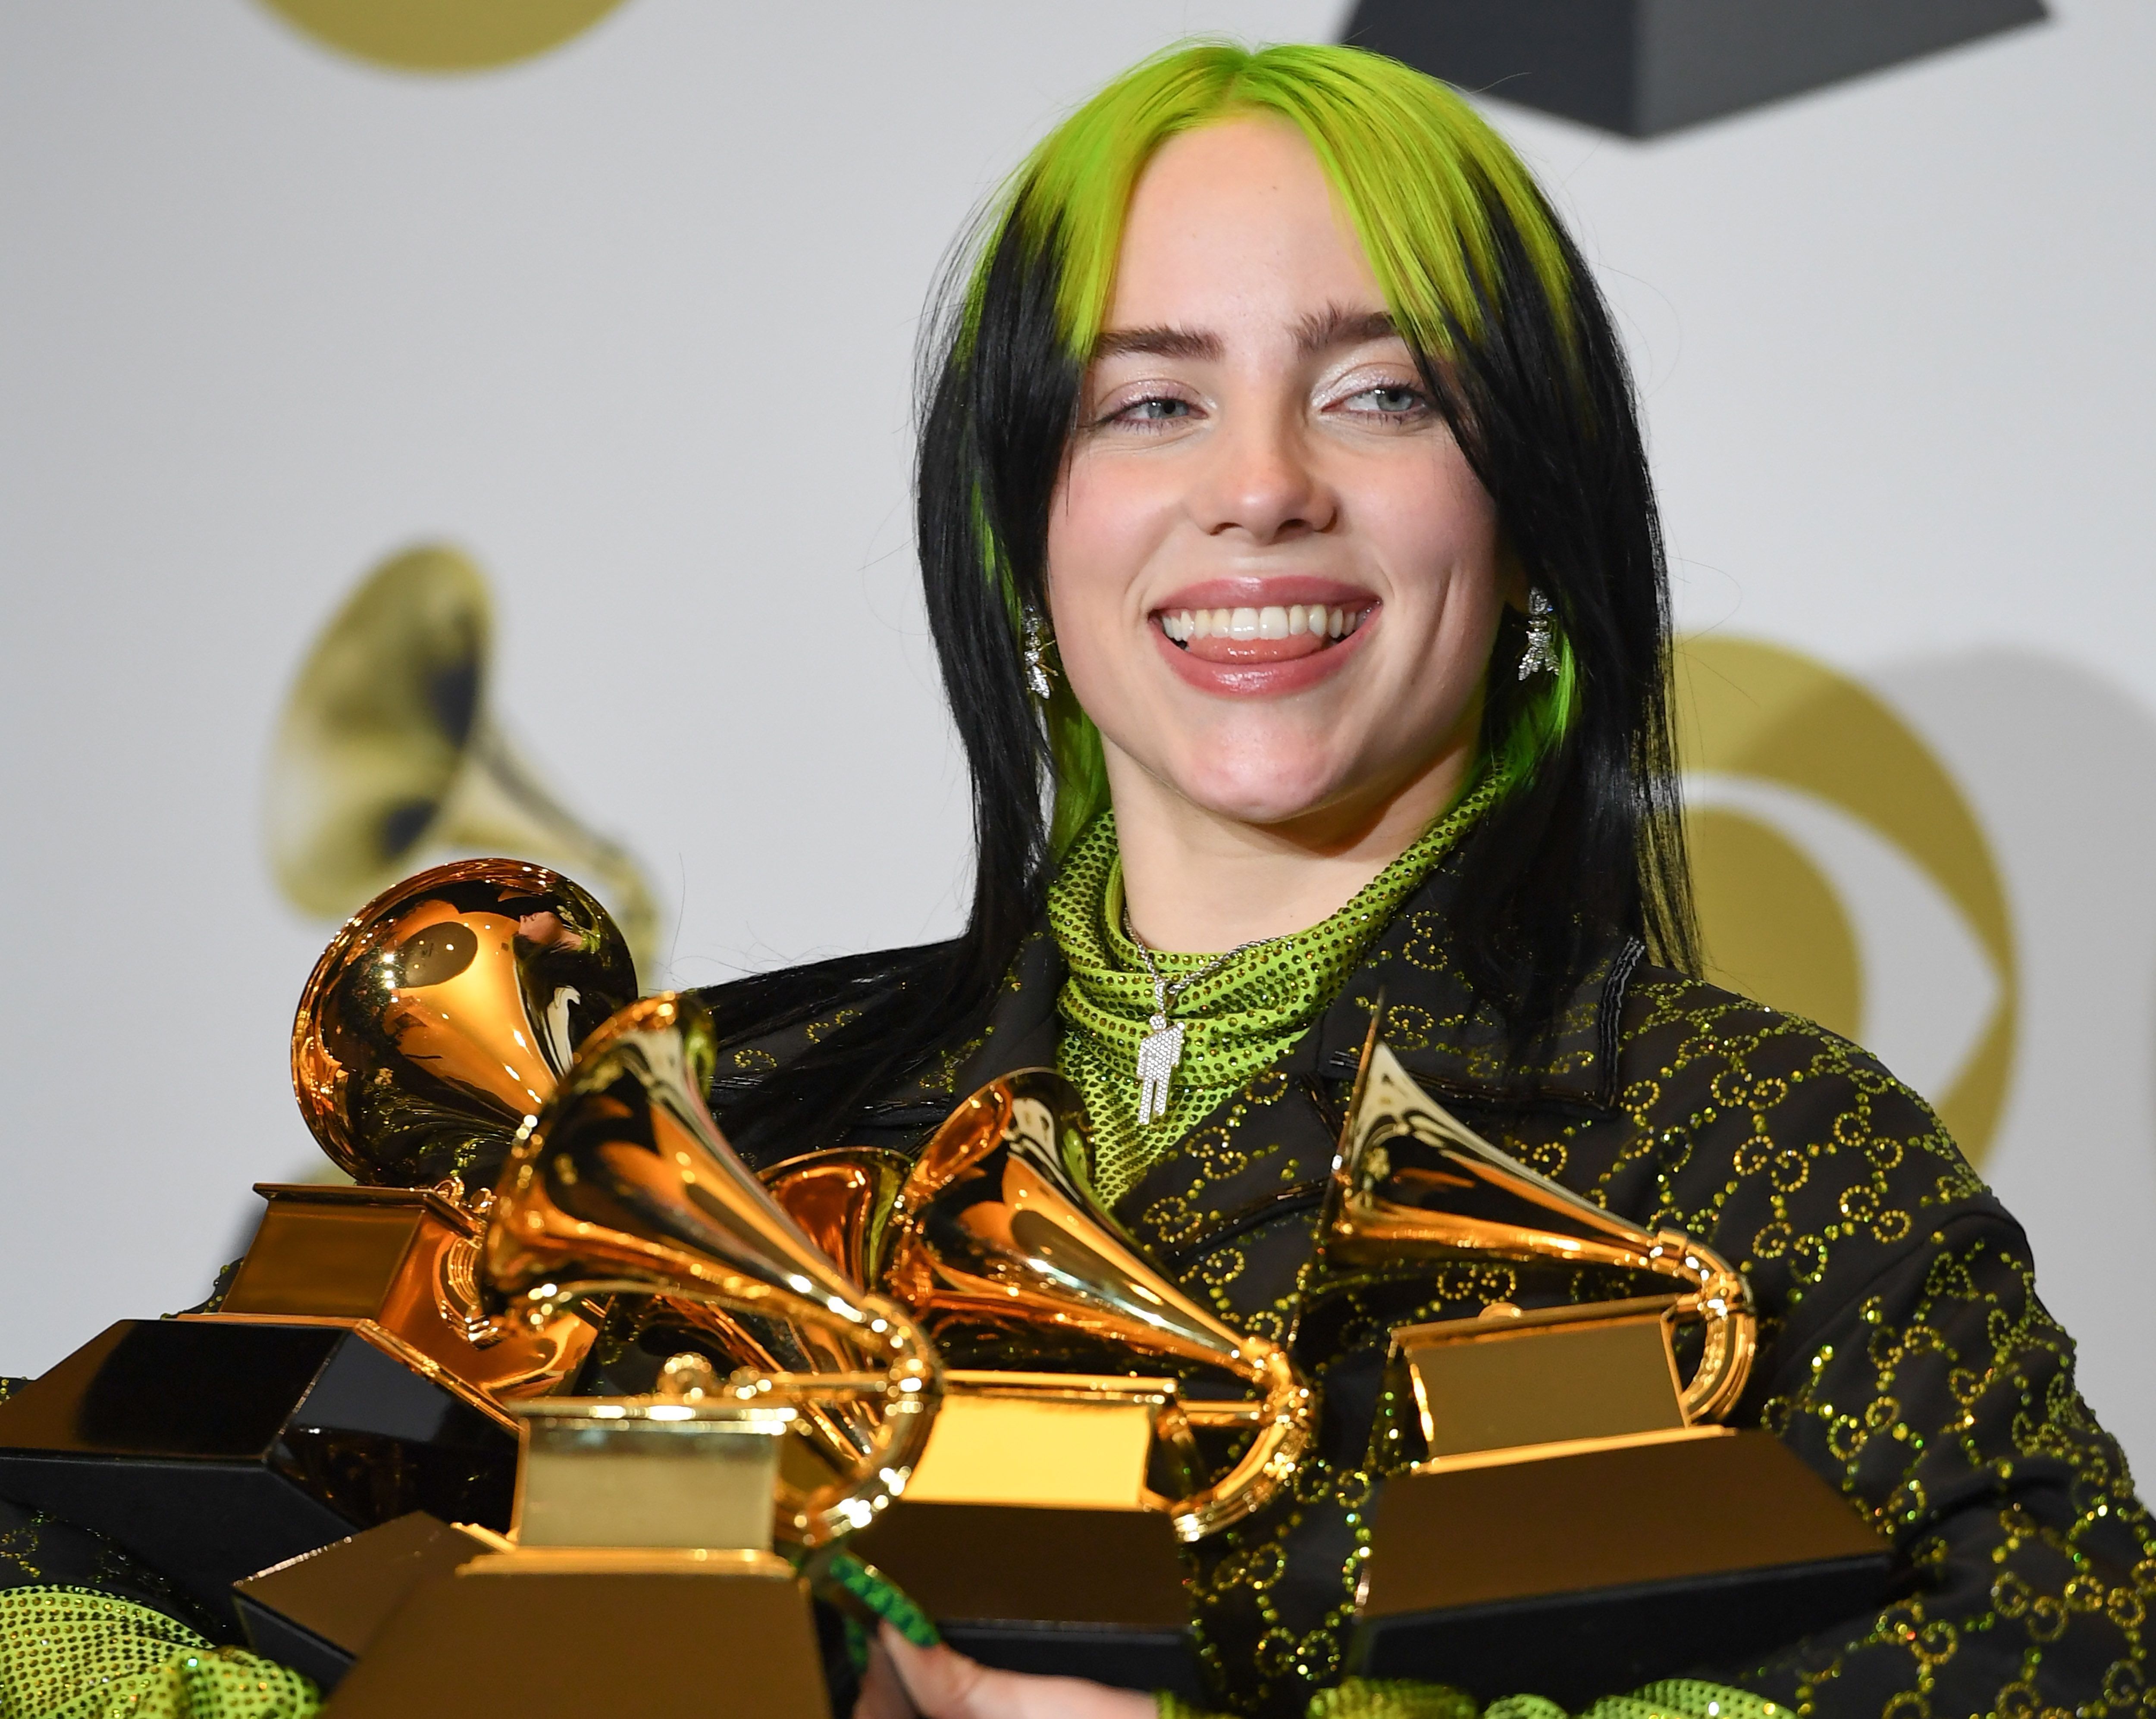 Billie Eilish the Youngest Artist to Win All Top Four Grammy